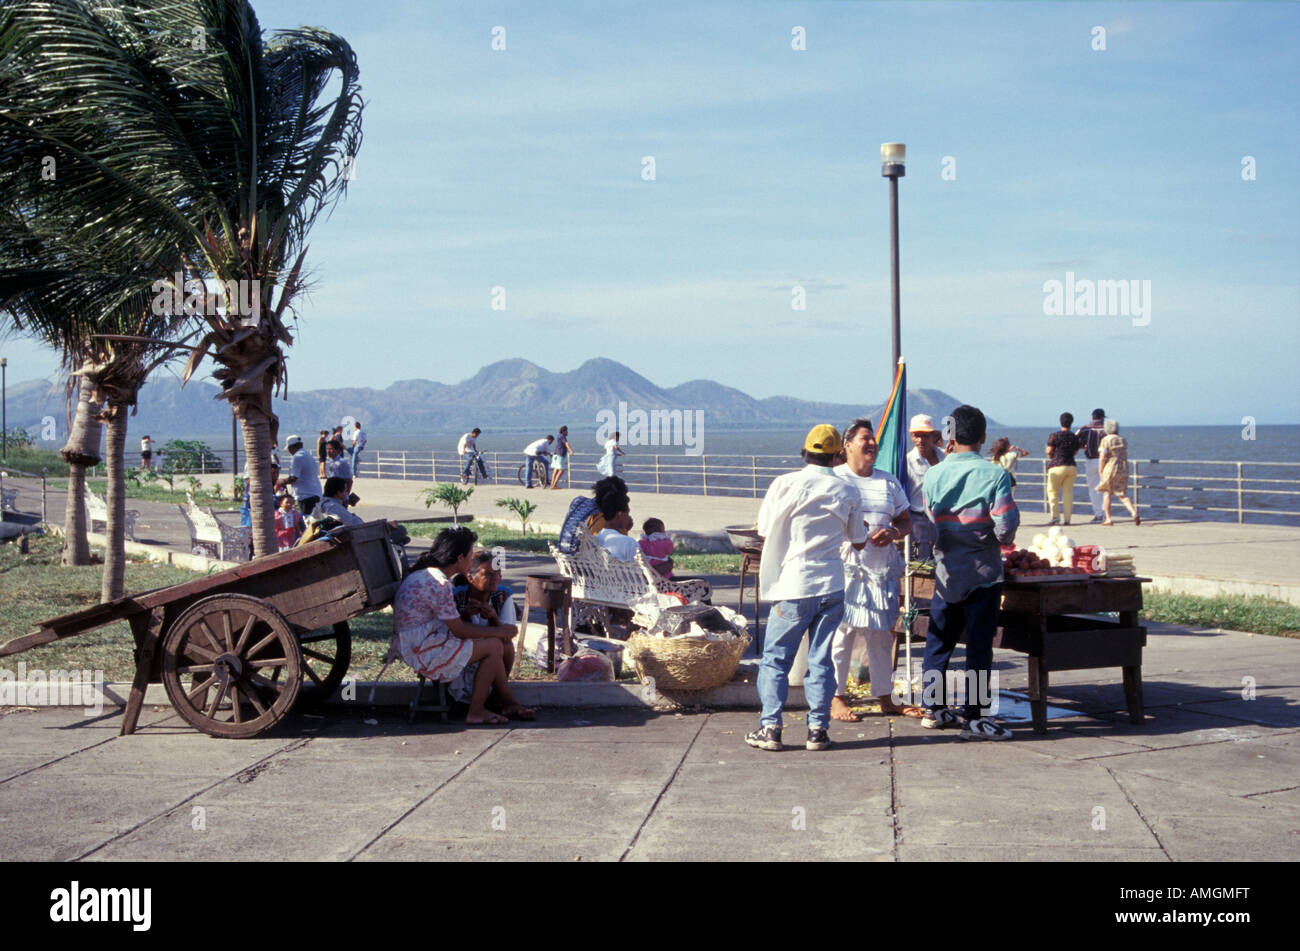 People relaxing and chatting on the the Malecon pedestrian promenade, Managua, Nicaragua. Stock Photo